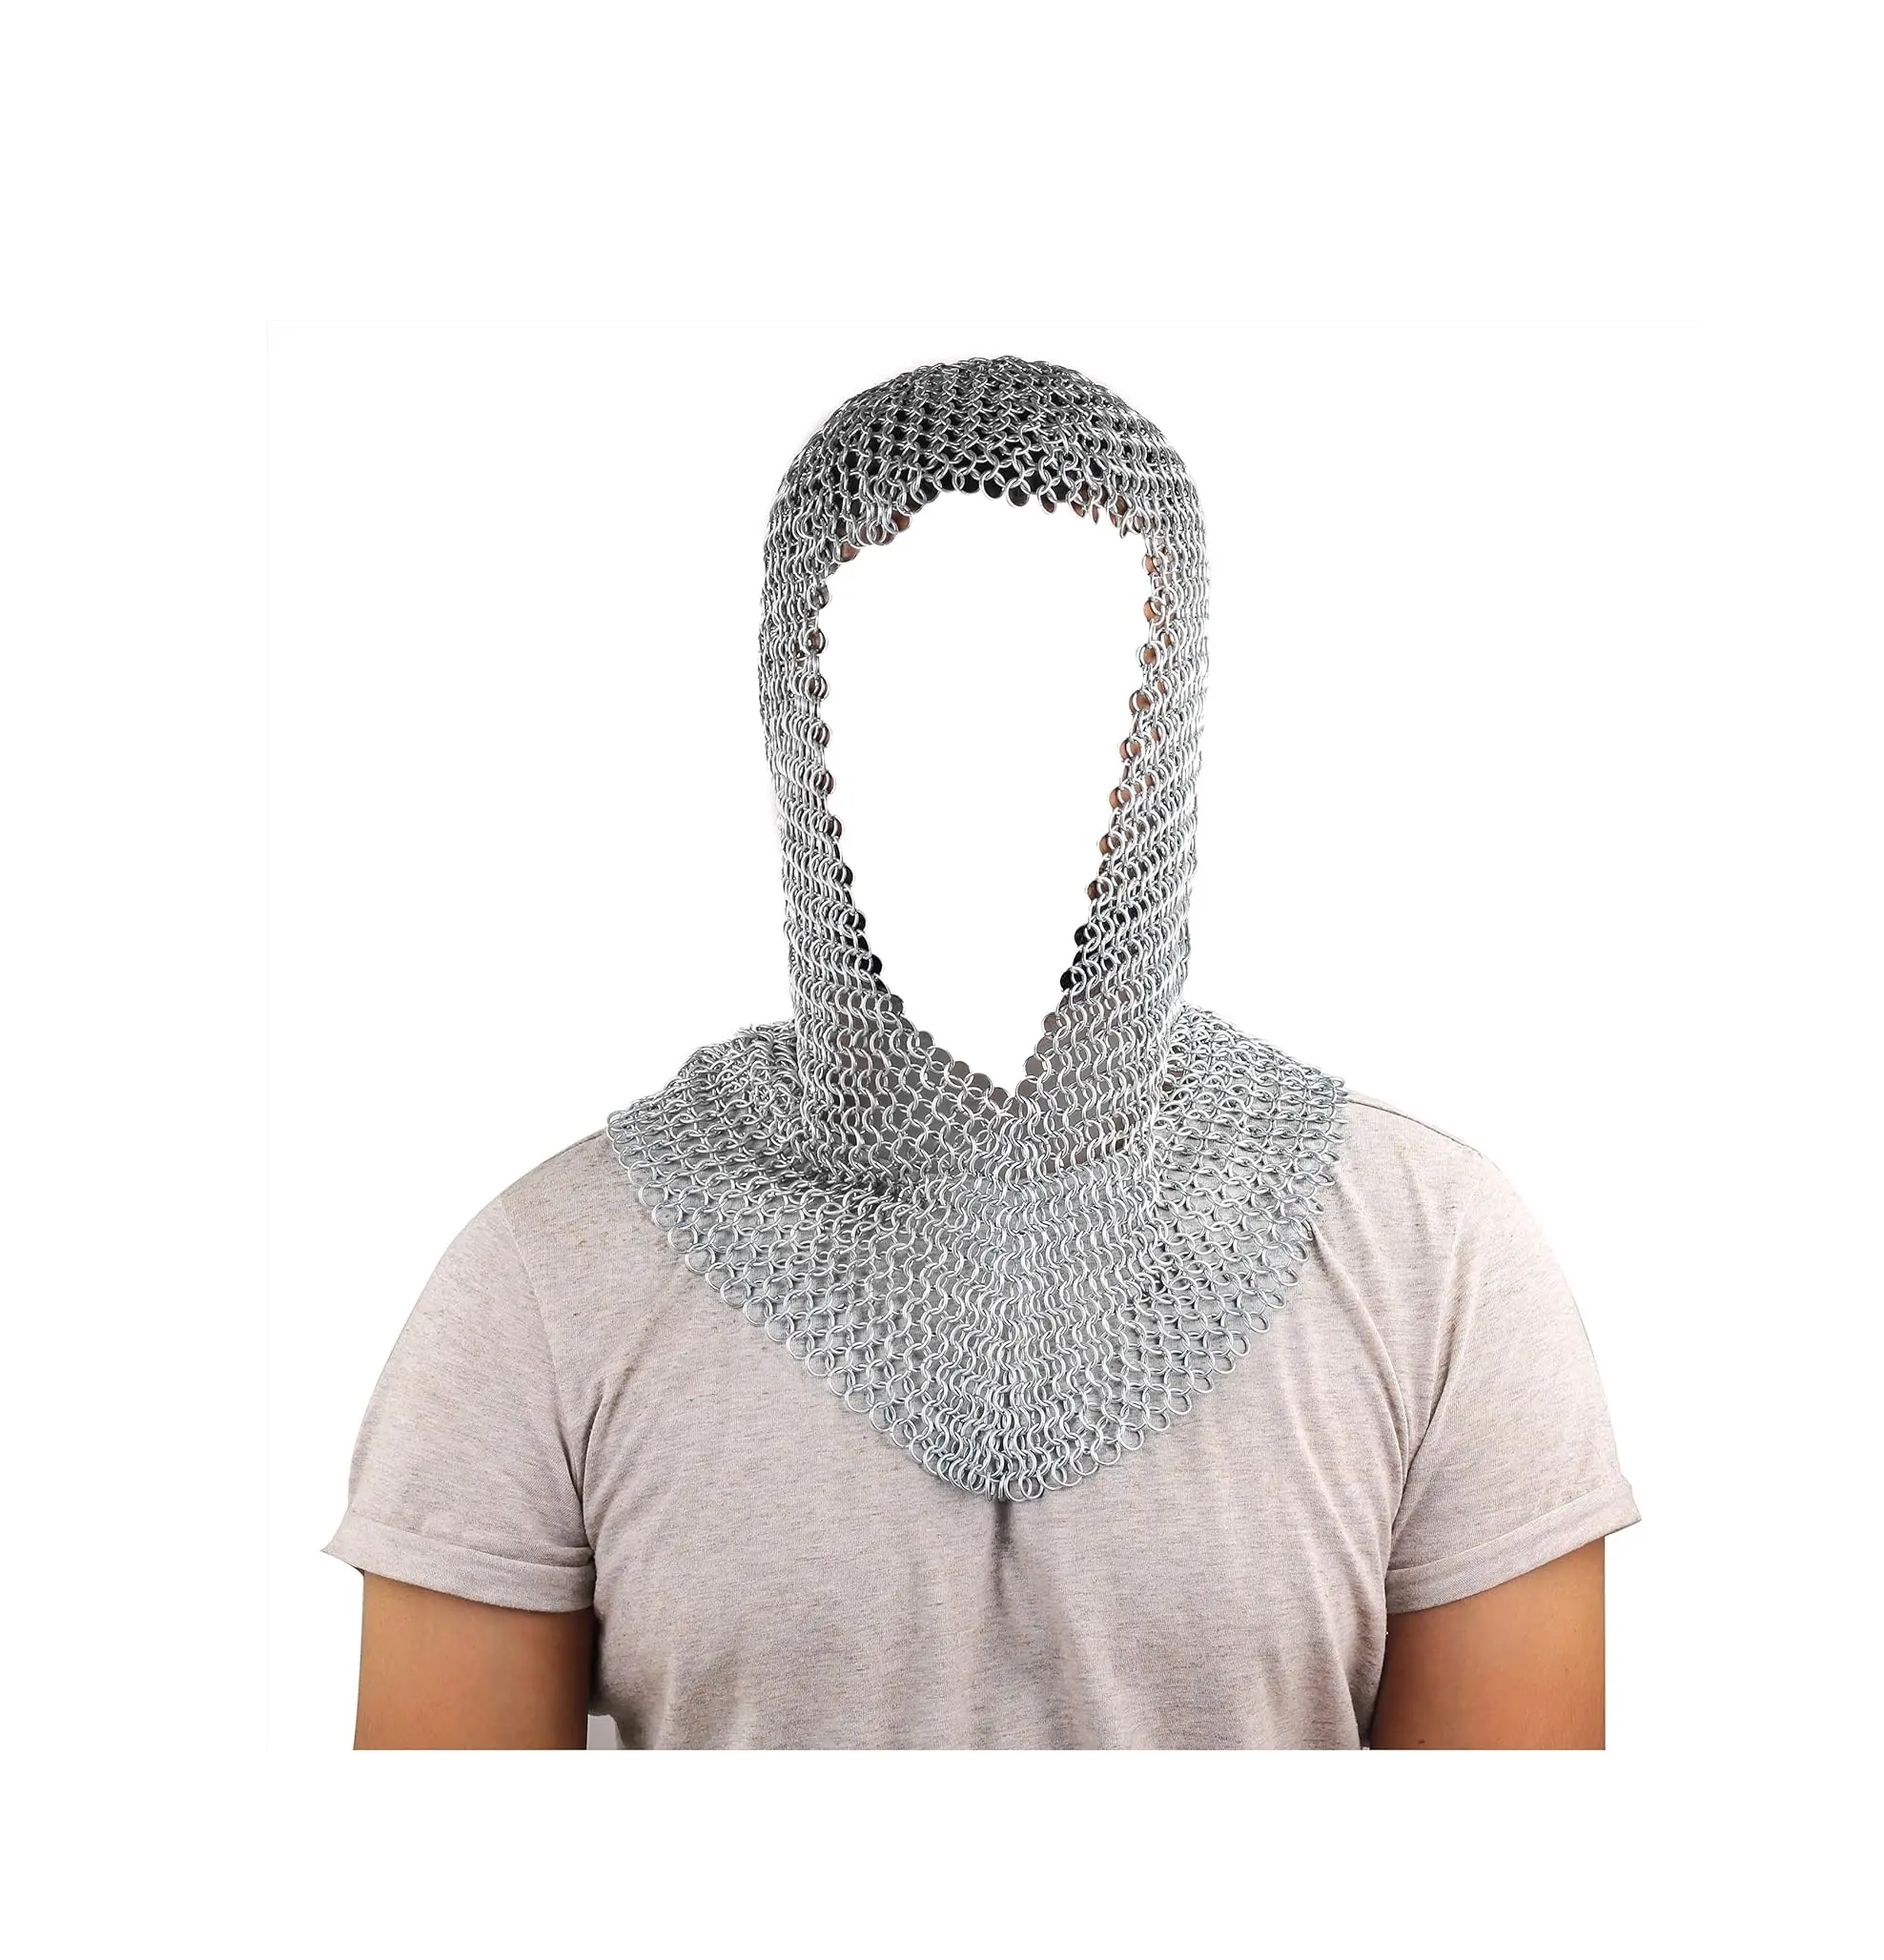 Battle Ready Chain Mail Coif Armor | Stainless Steel Shoulder & Face Chain Mail Cover & Hood For Protection | Original Authentic